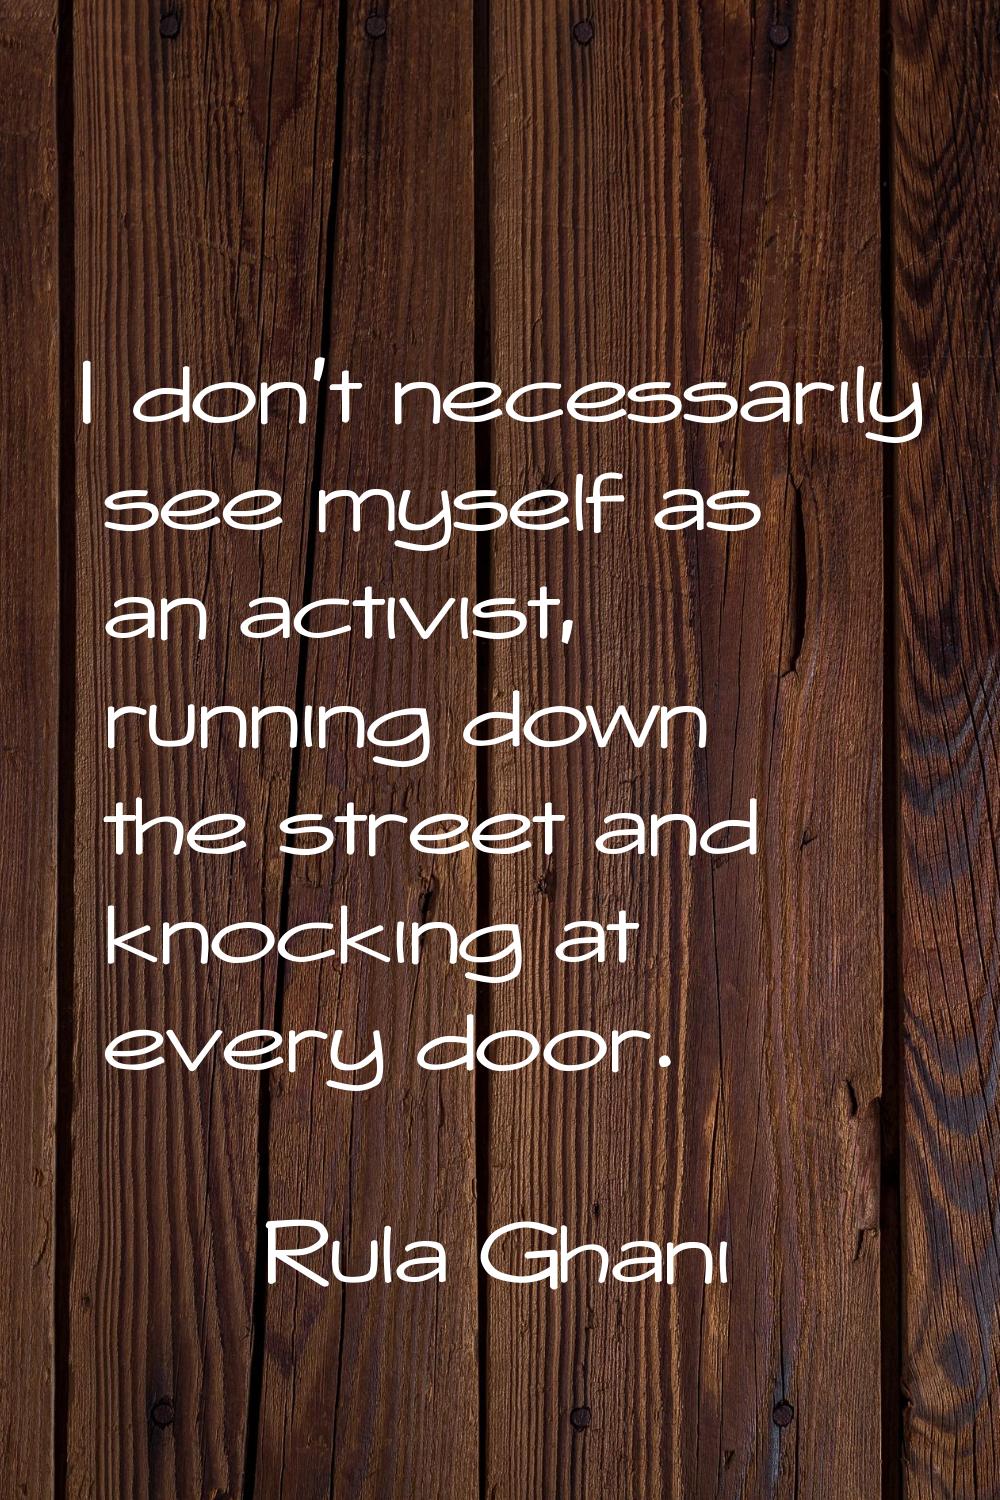 I don't necessarily see myself as an activist, running down the street and knocking at every door.